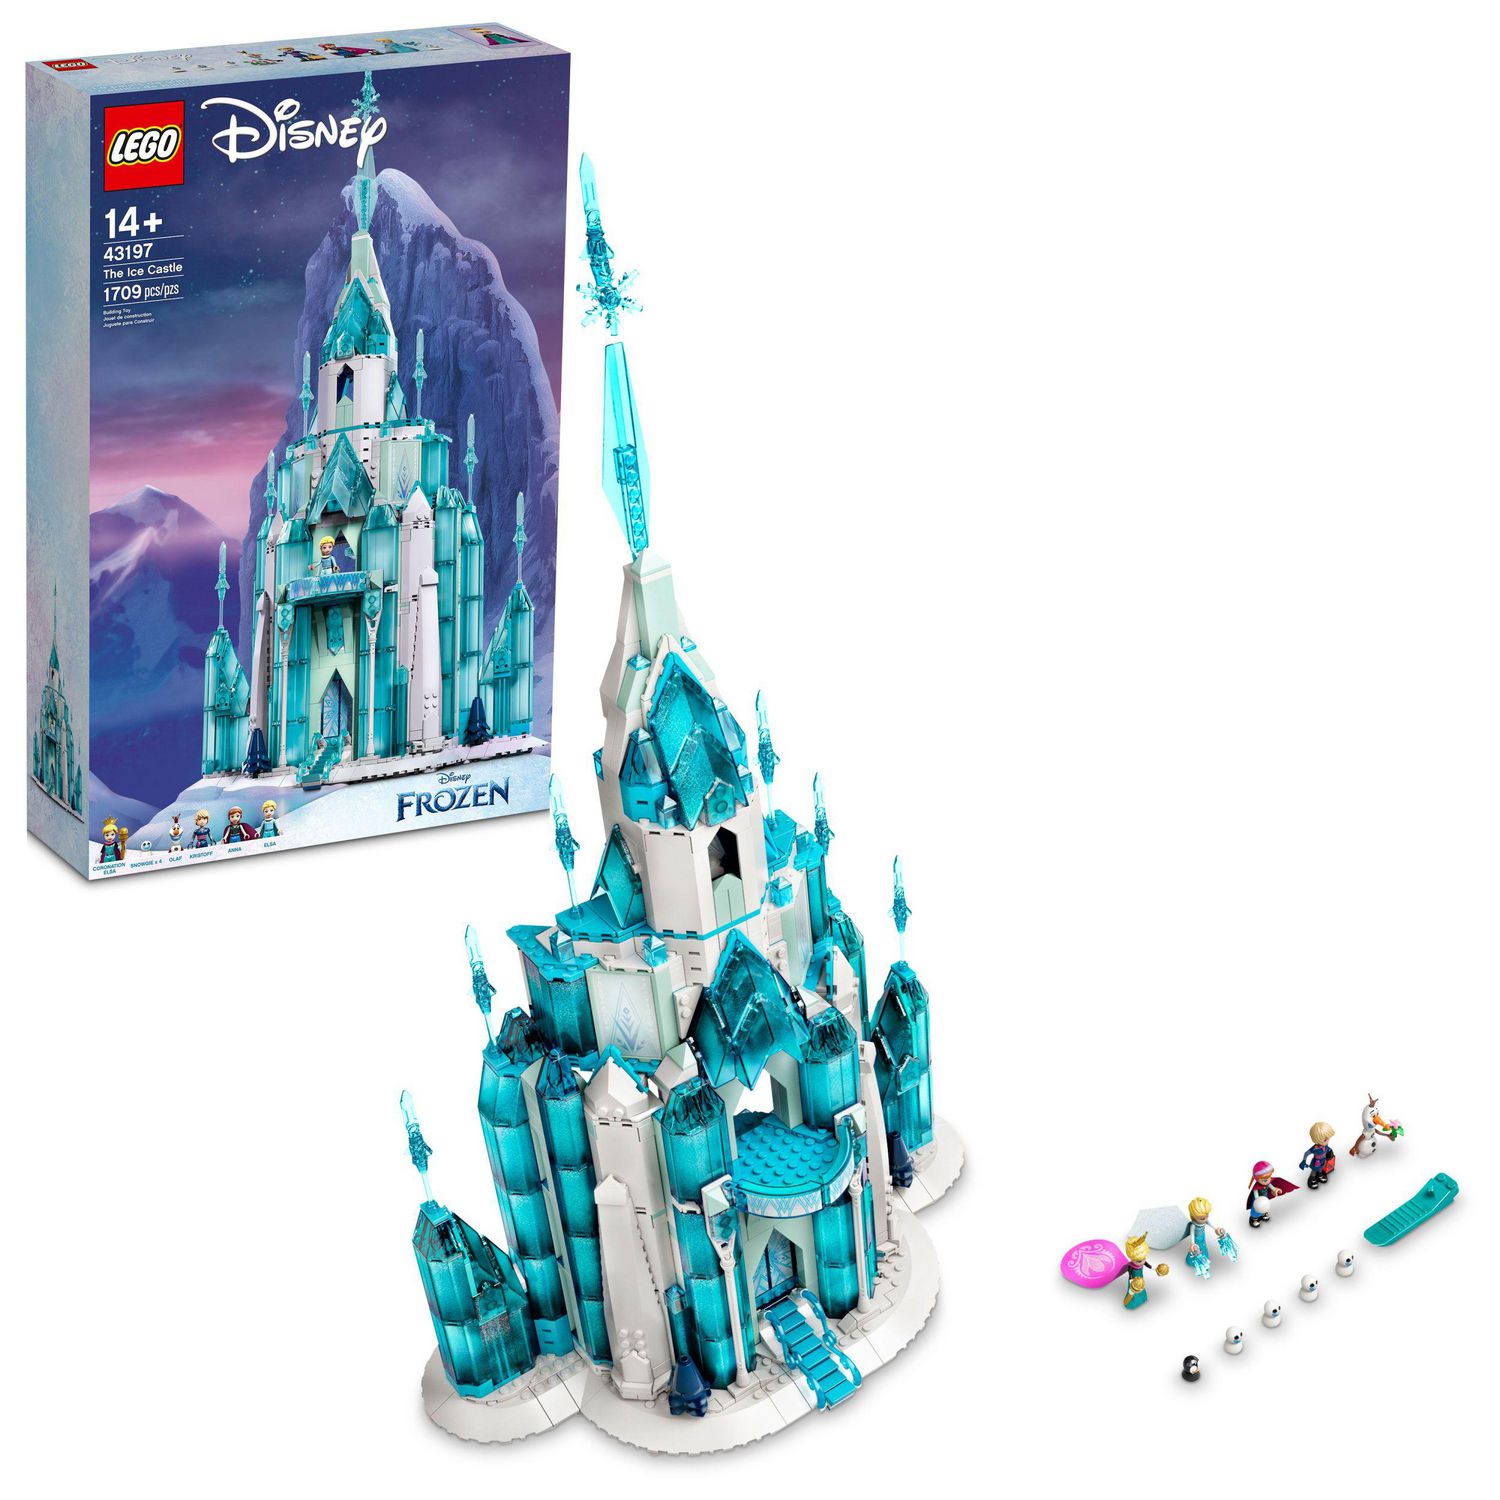 LEGO 43196 Belle and the Beast's Castle - LEGO Disney Princess - Brick  Condition New.